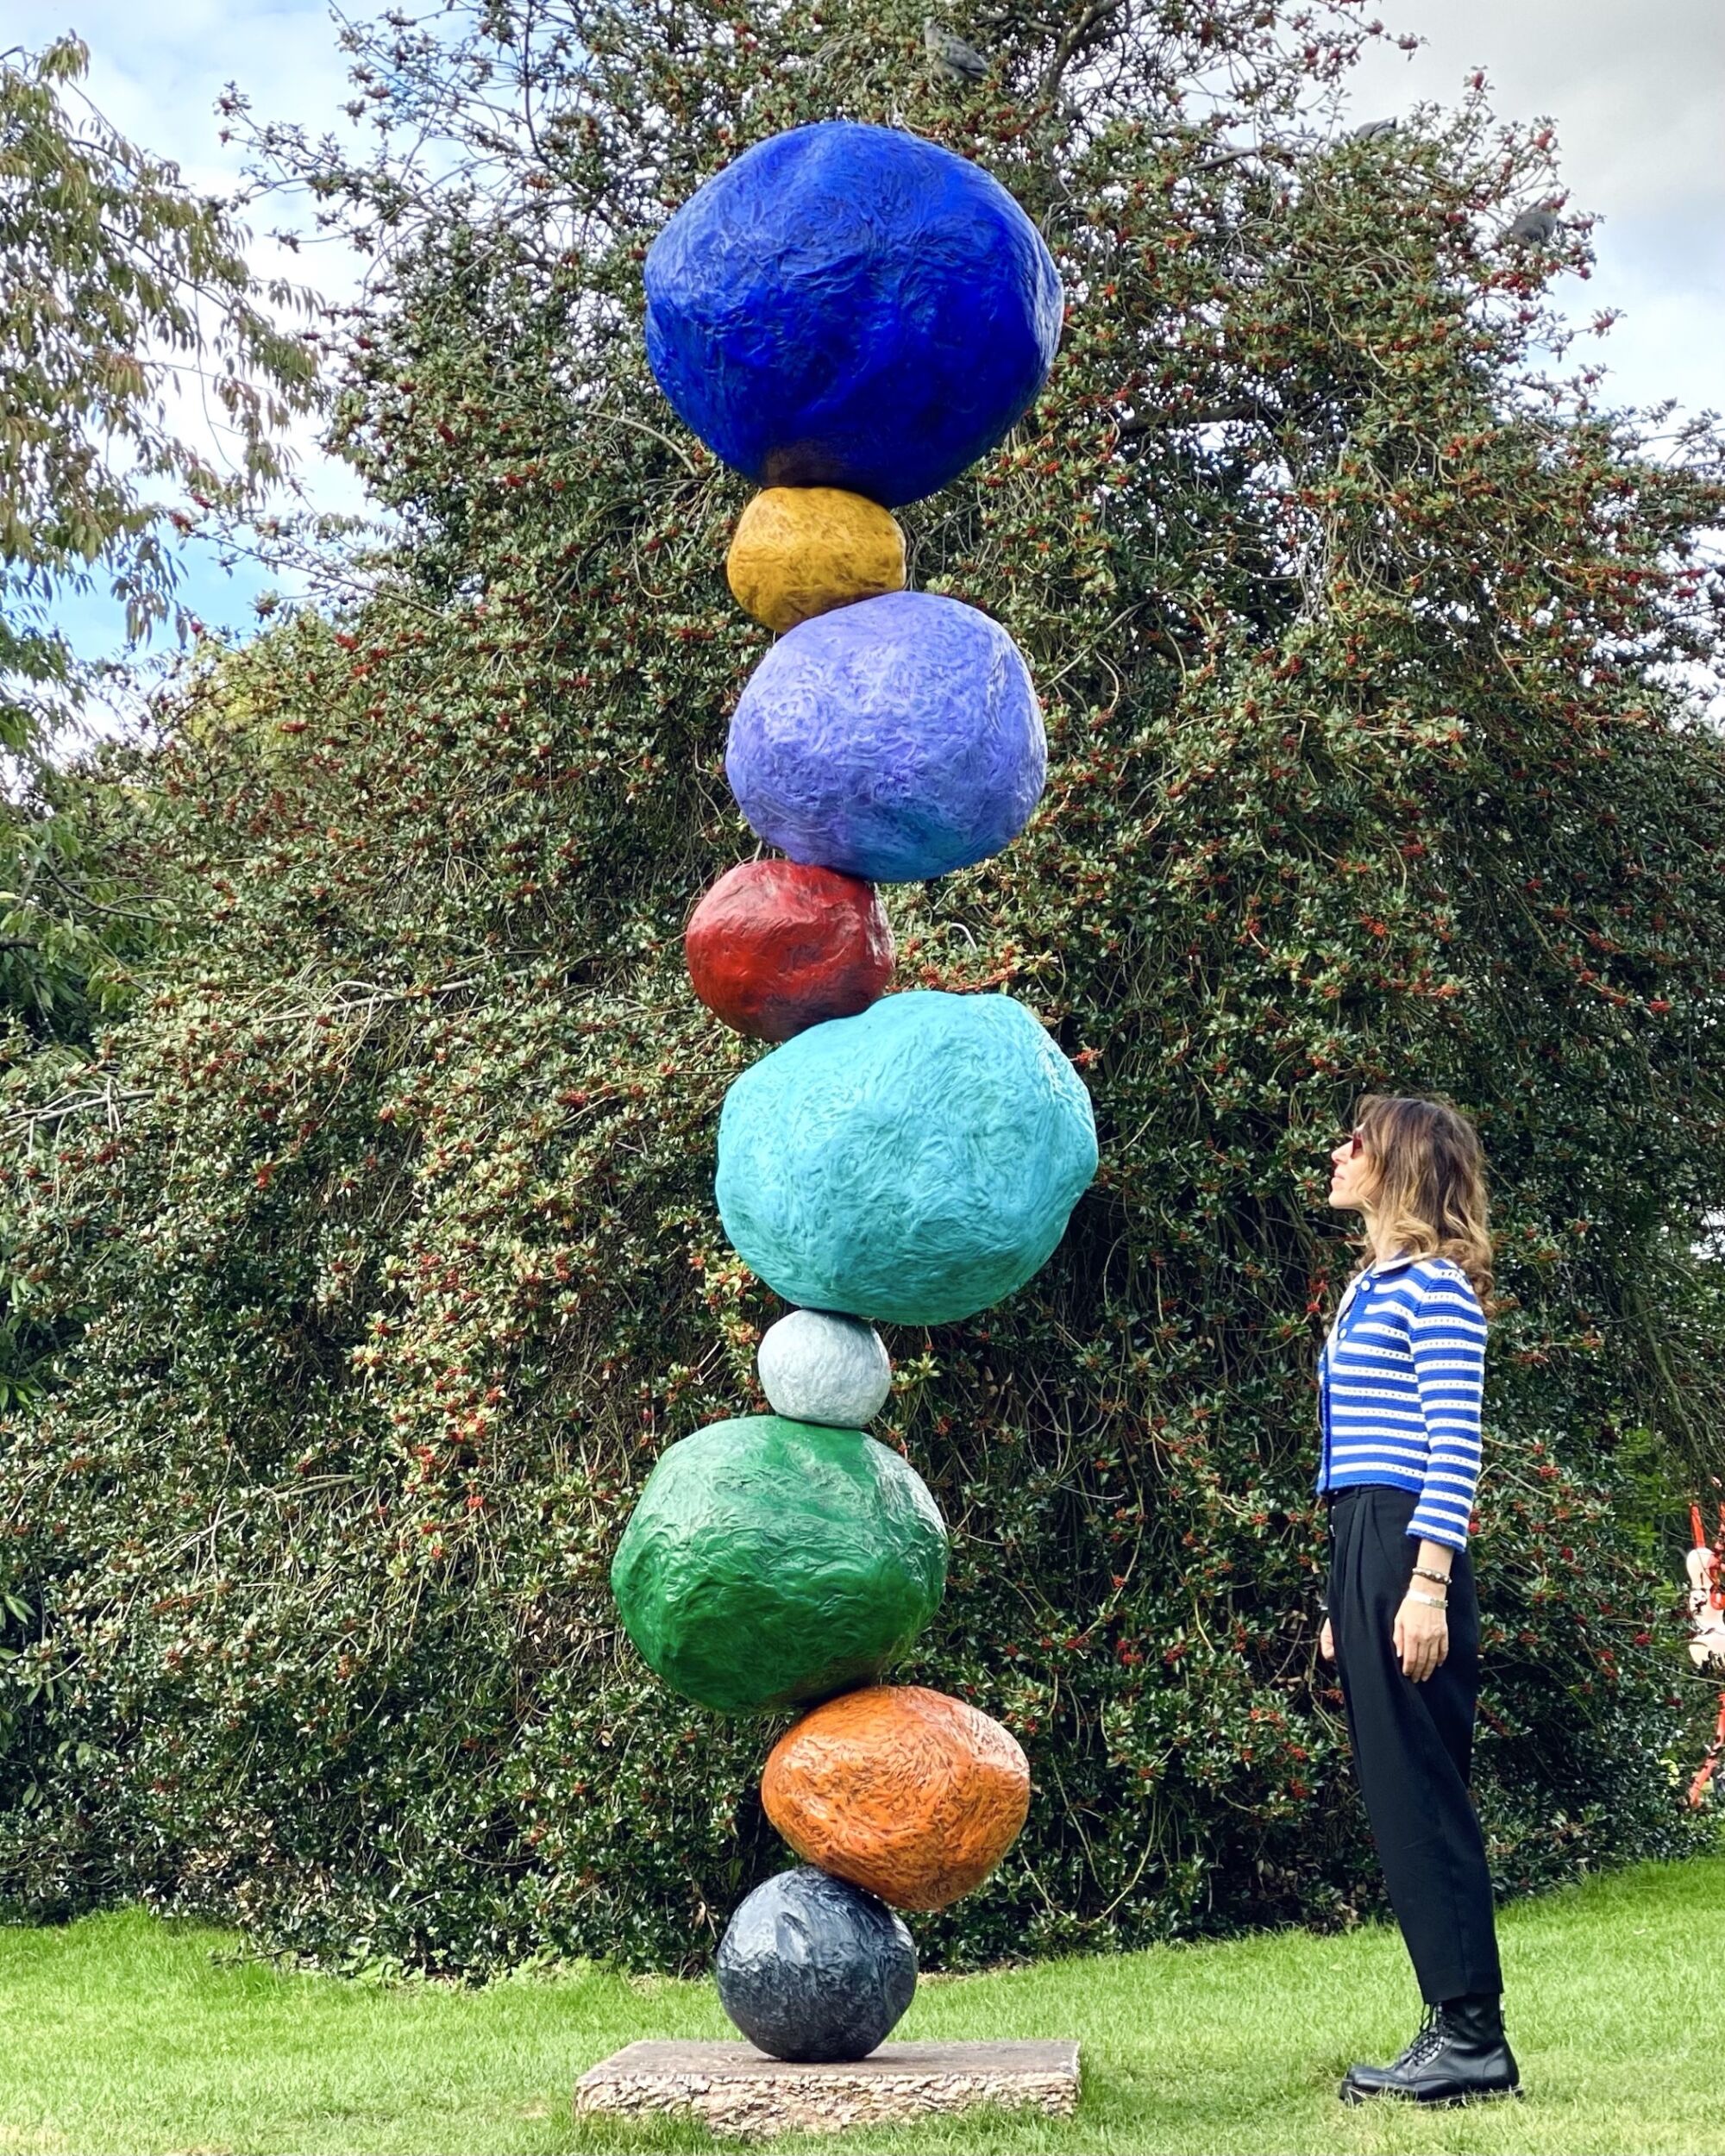 The Wick - Annie Morris with her Stack sculpture. (Courtesy of Annie Morris)